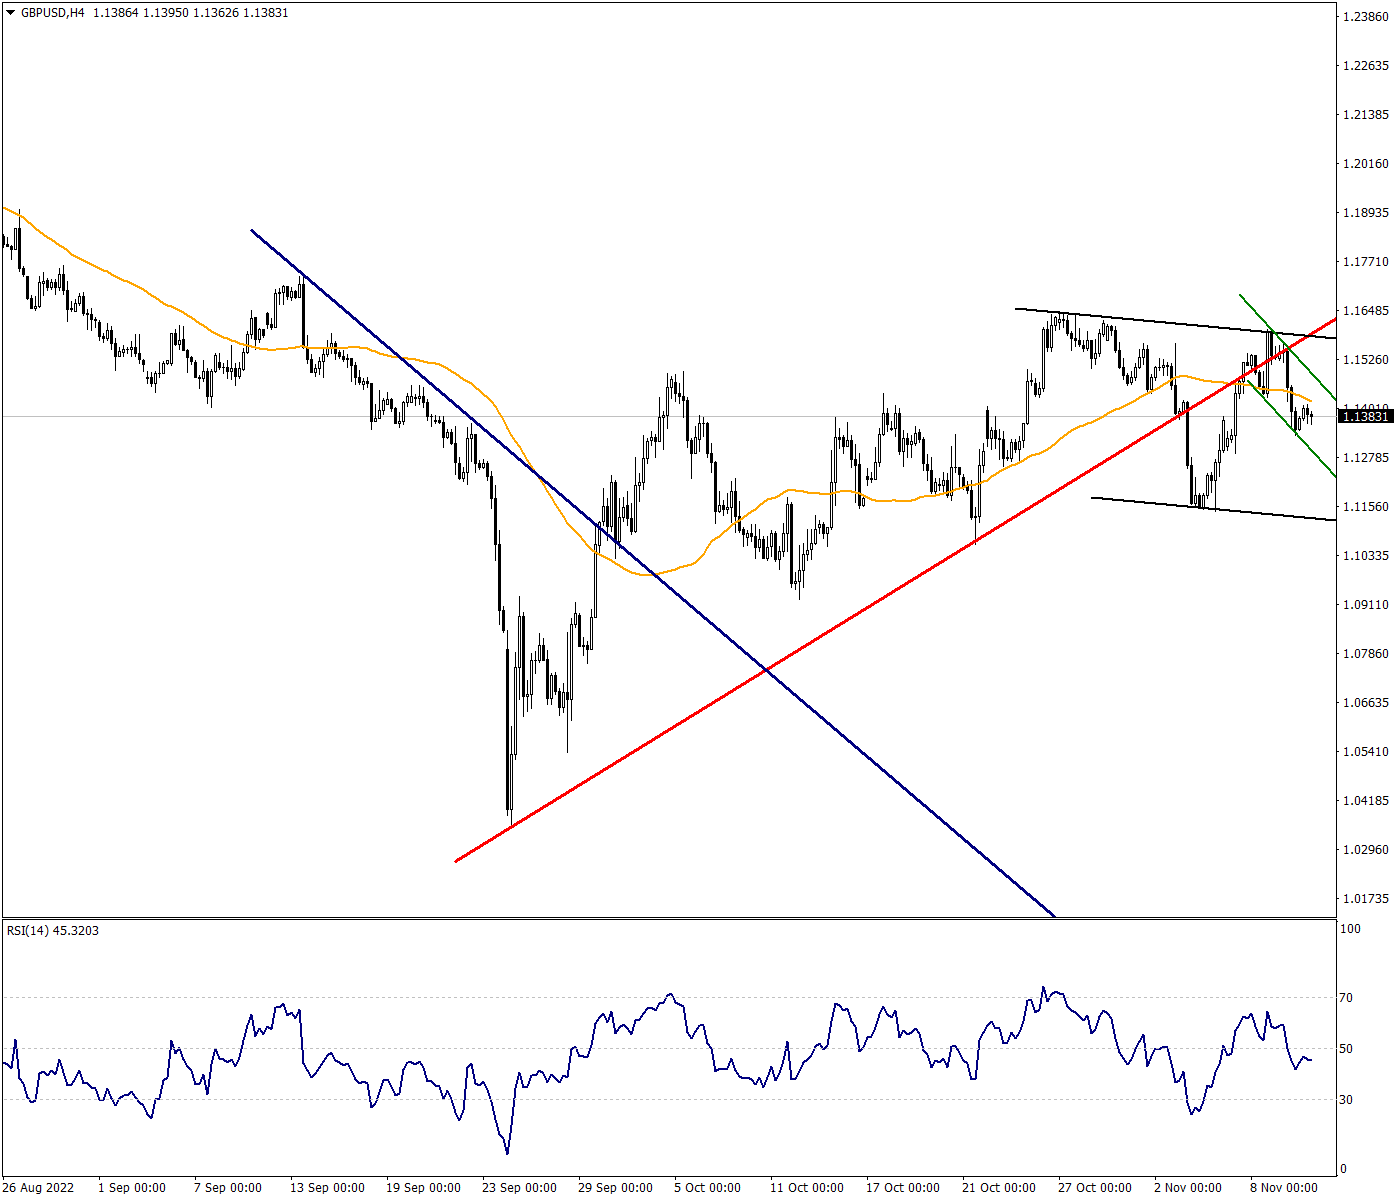 GBPUSD May Deepen its Downward Movements